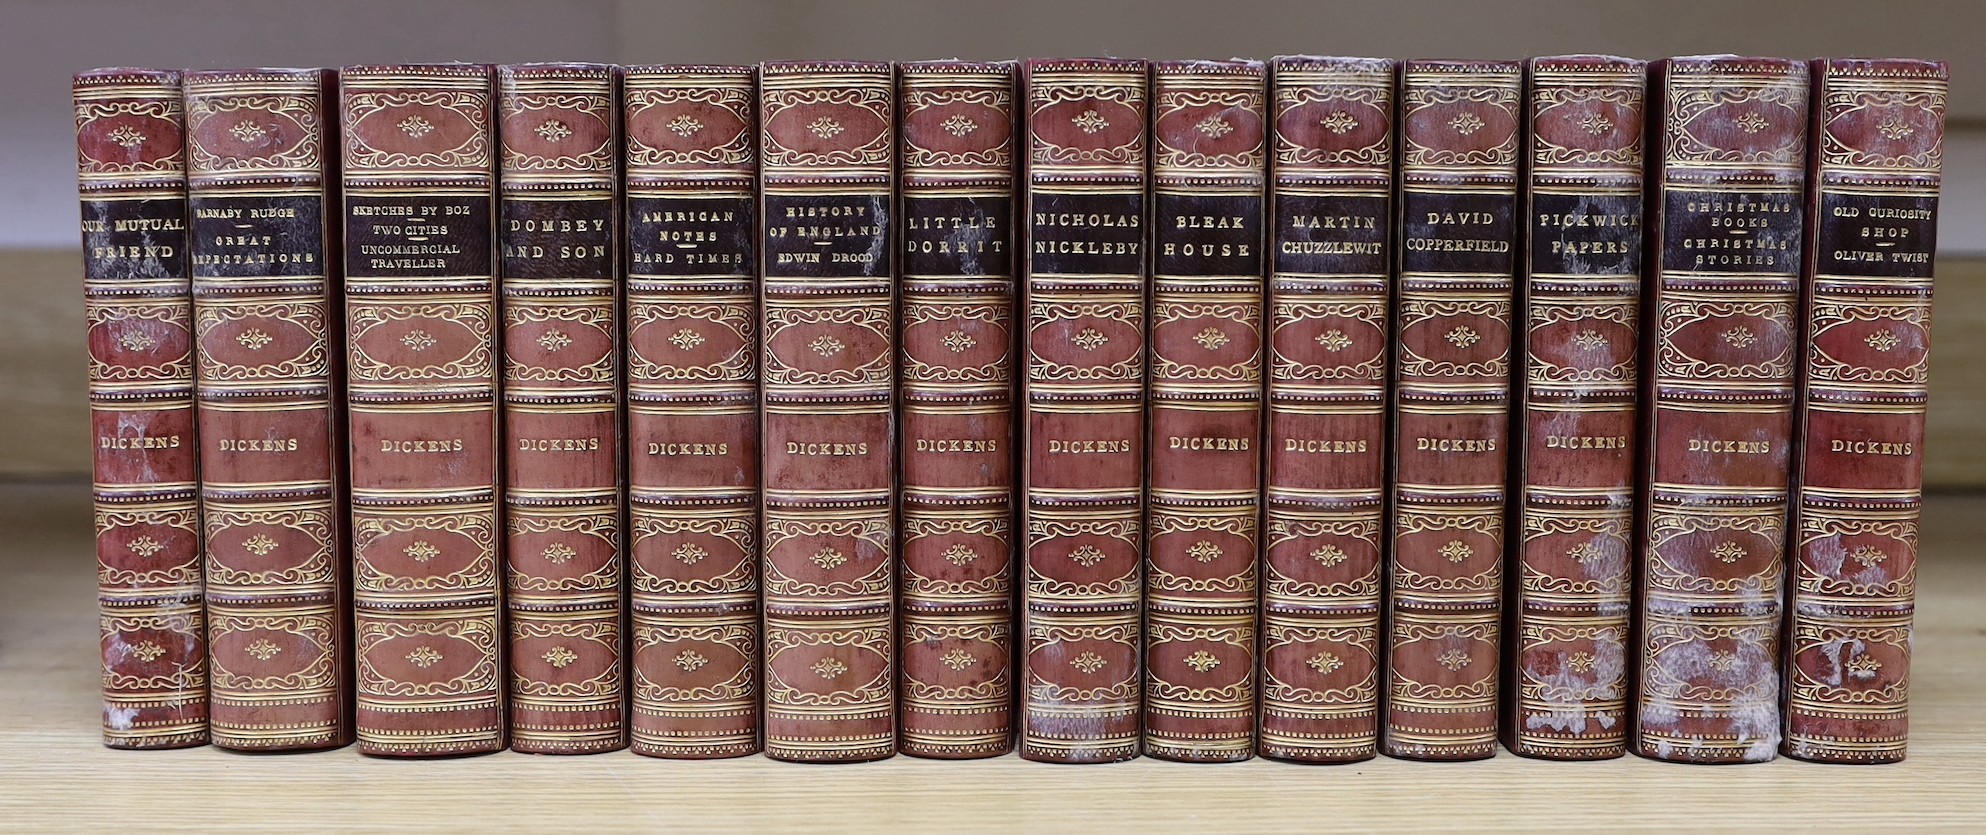 Dickens, Charles - The Works, 14 vols, 8vo, half calf, Chapman and Hall, London, 1888